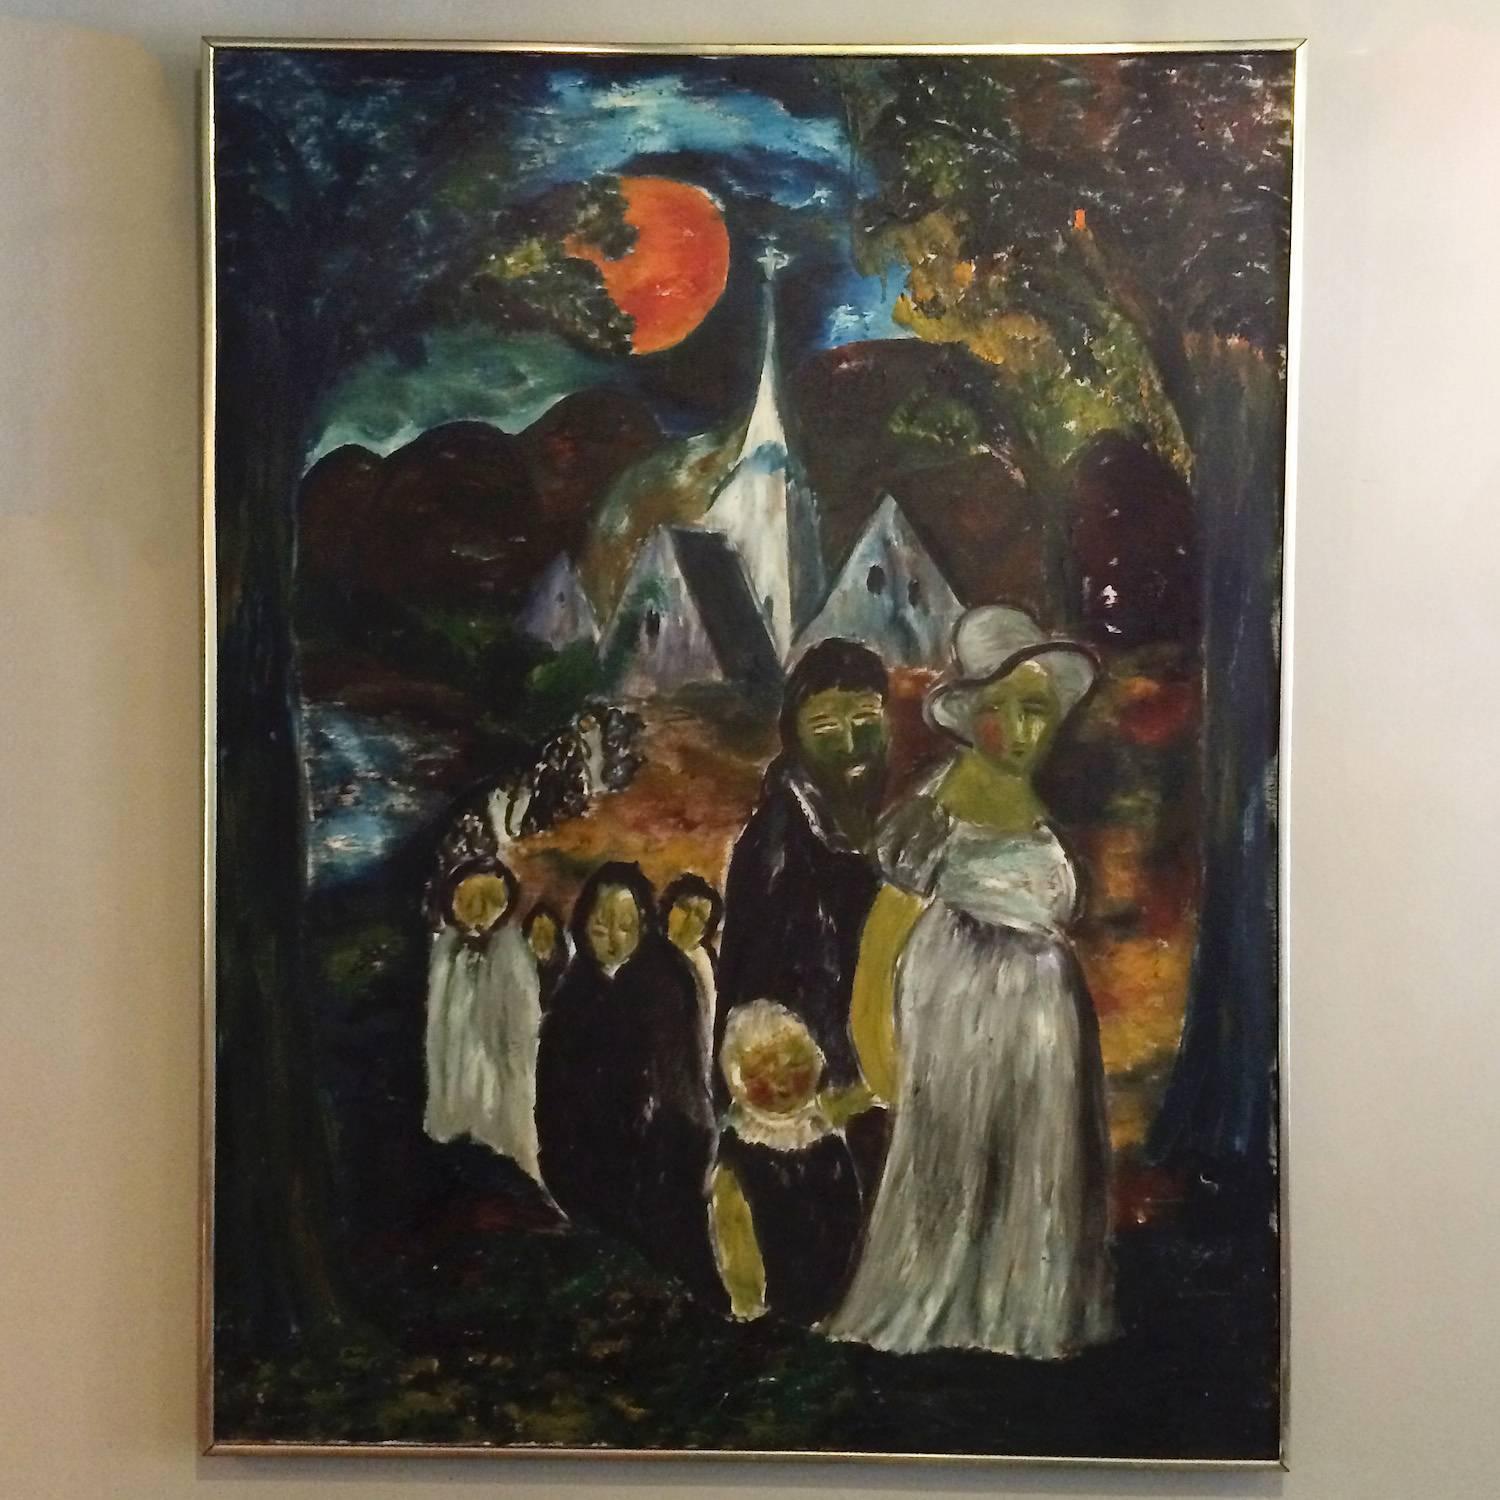 Large impressive Folk Art acrylic painting of a haunting, moonlit, church procession is signed by the Danish born artist and dated 1963. There is one small tear in the canvas as shown. Frame is aluminum and wood. This artist's work also includes our